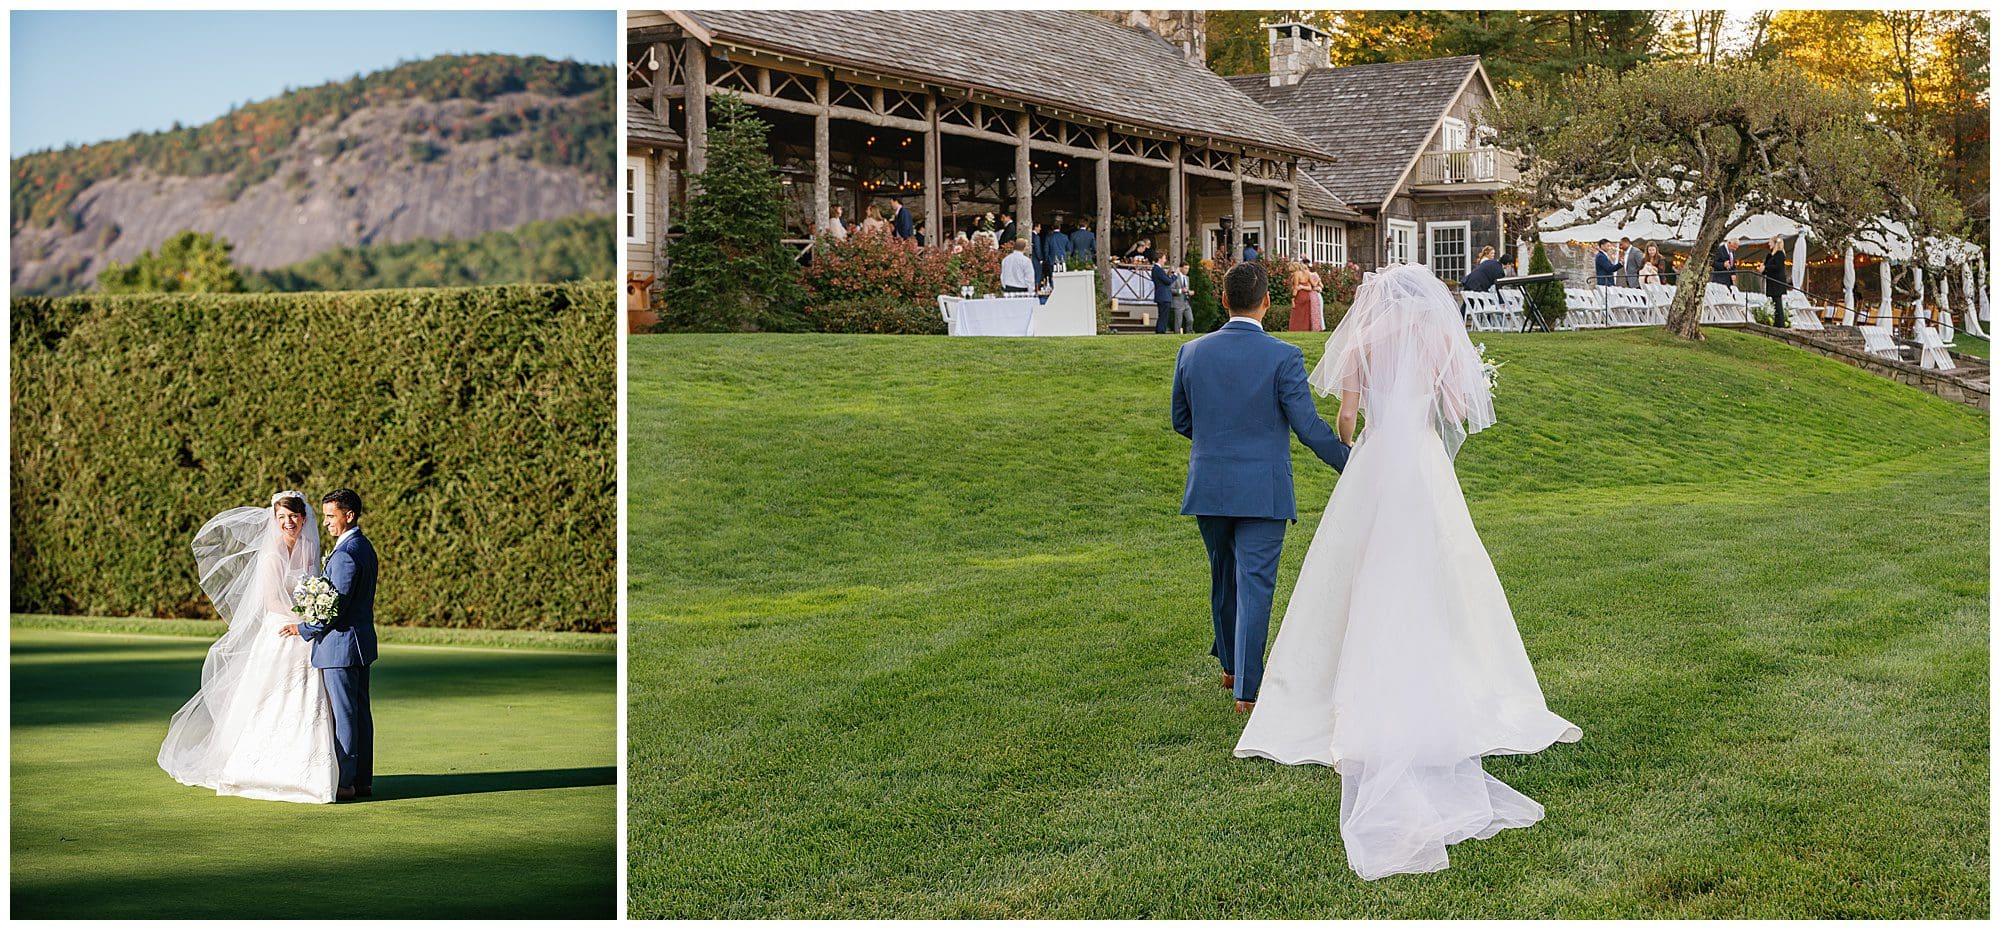 Two pictures of a bride and groom walking on the golf course.